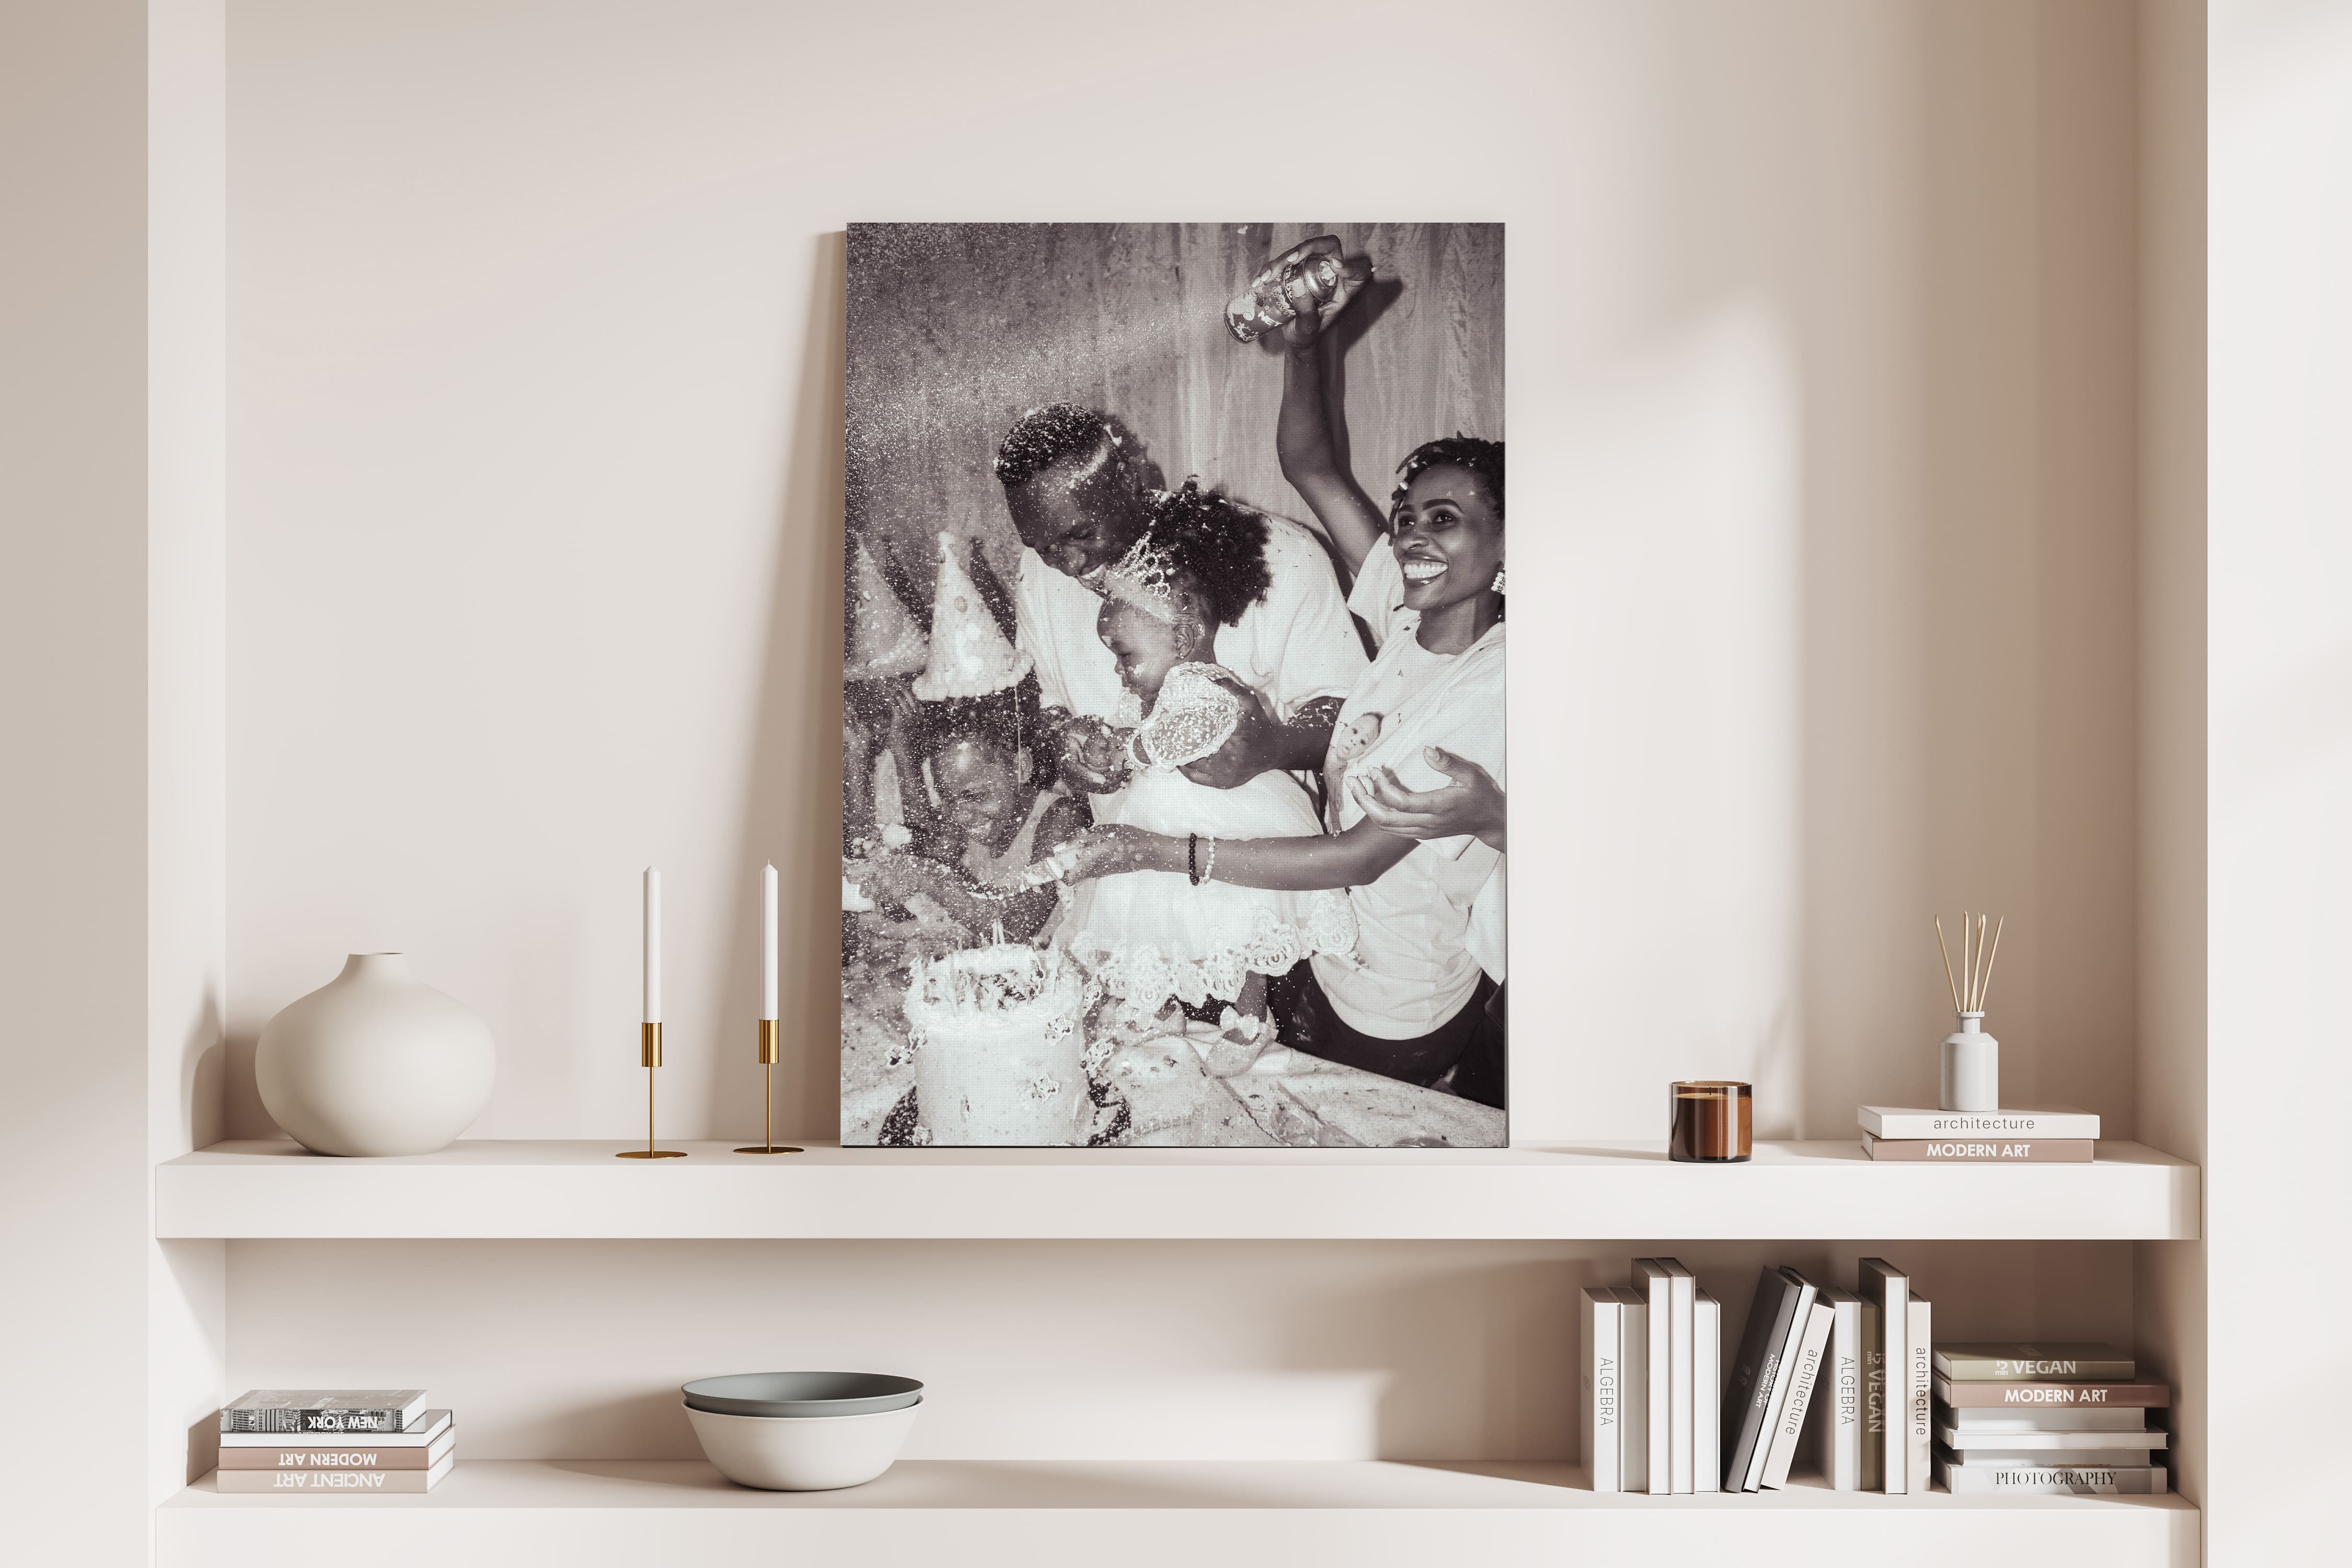 Black and white canvas print on shelf of family